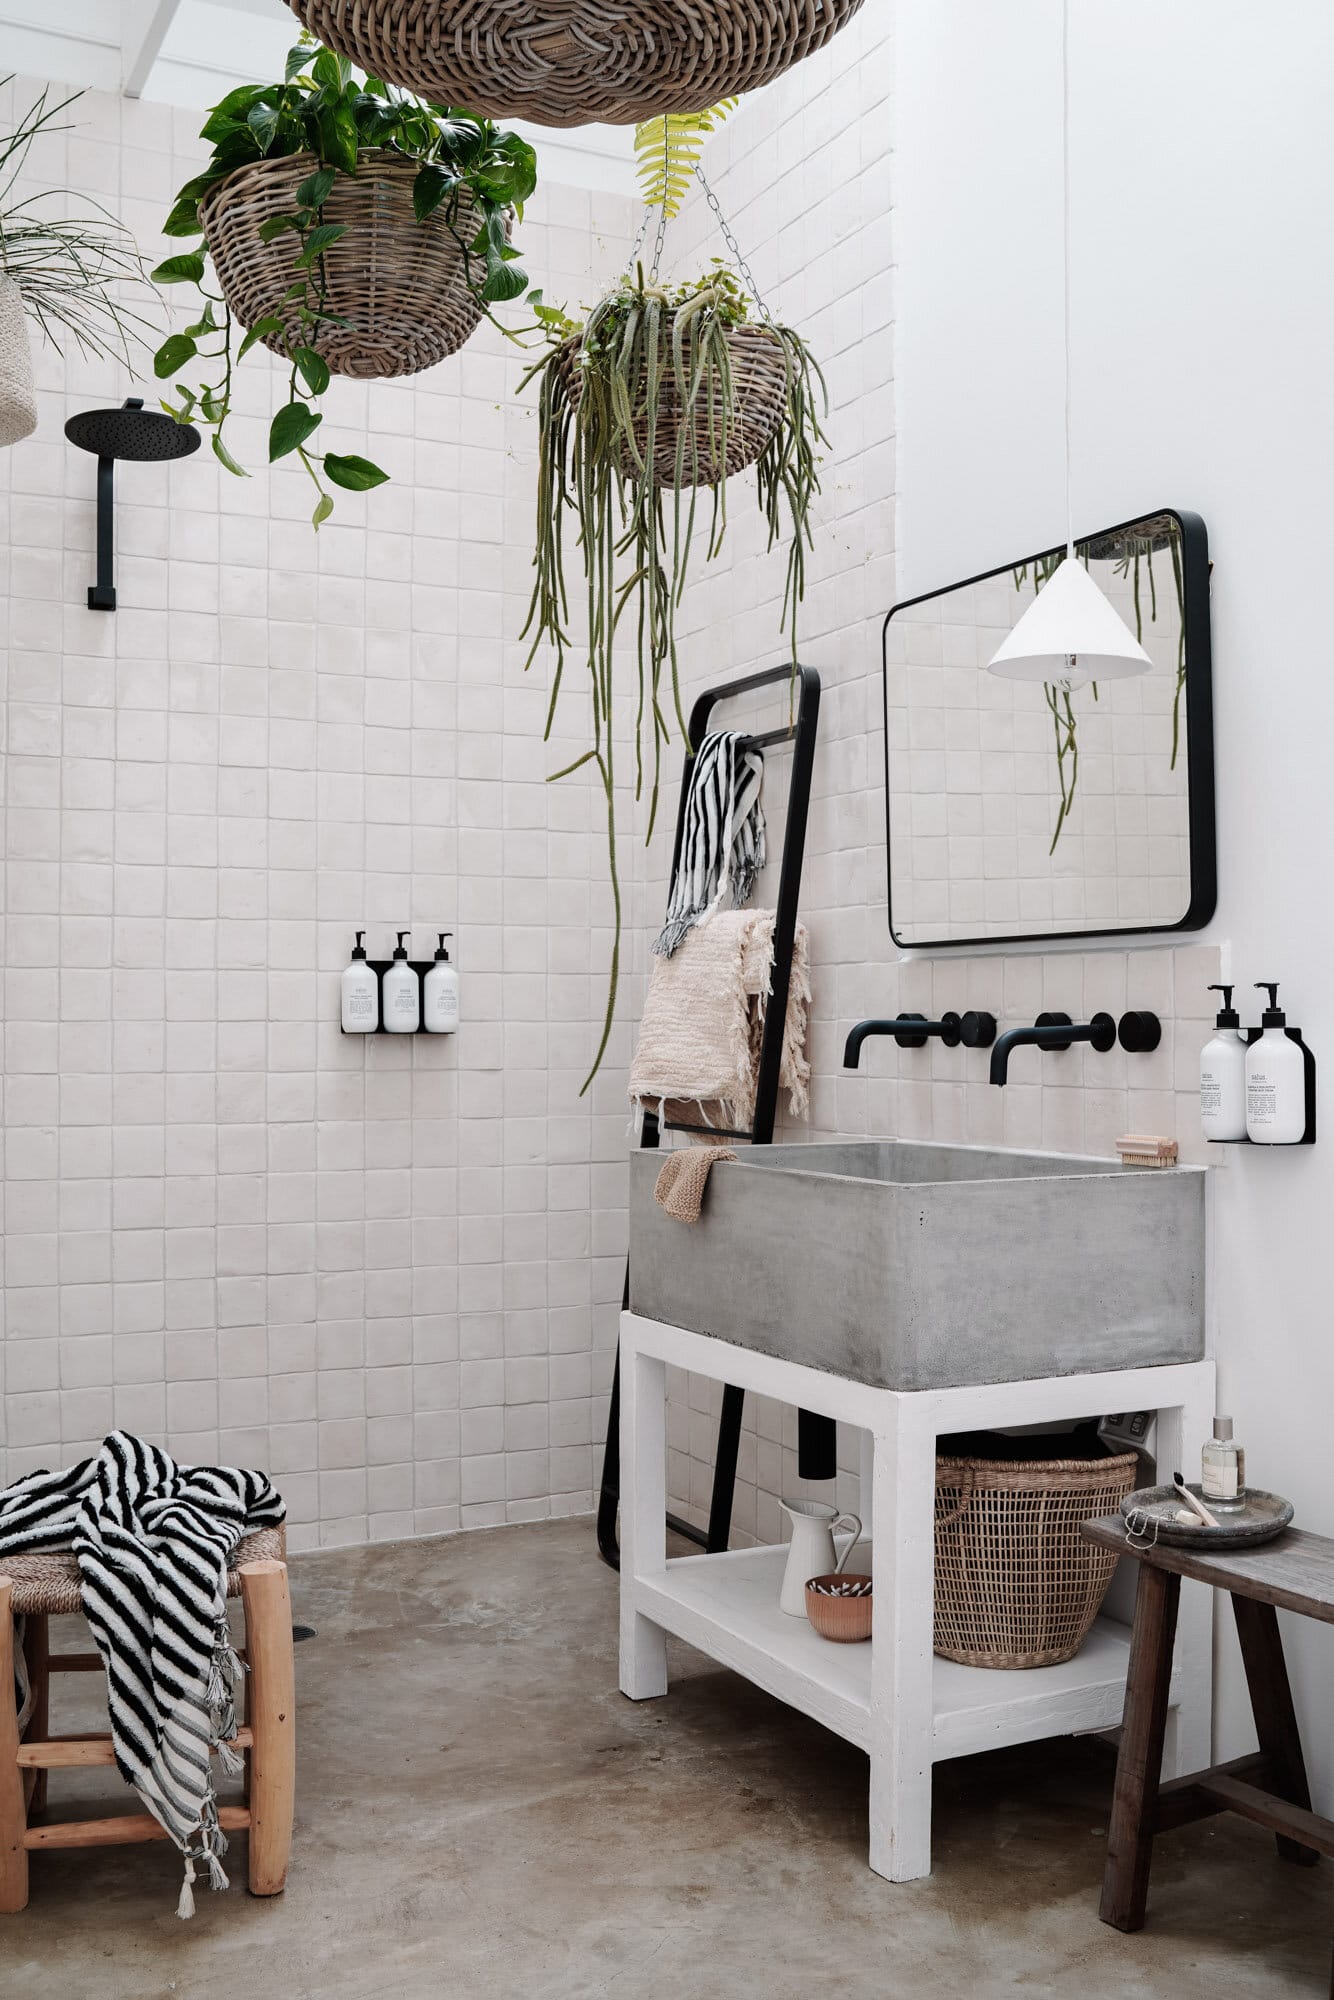 concrete and natural tile with hanging planter baskets in a styled rental cottage